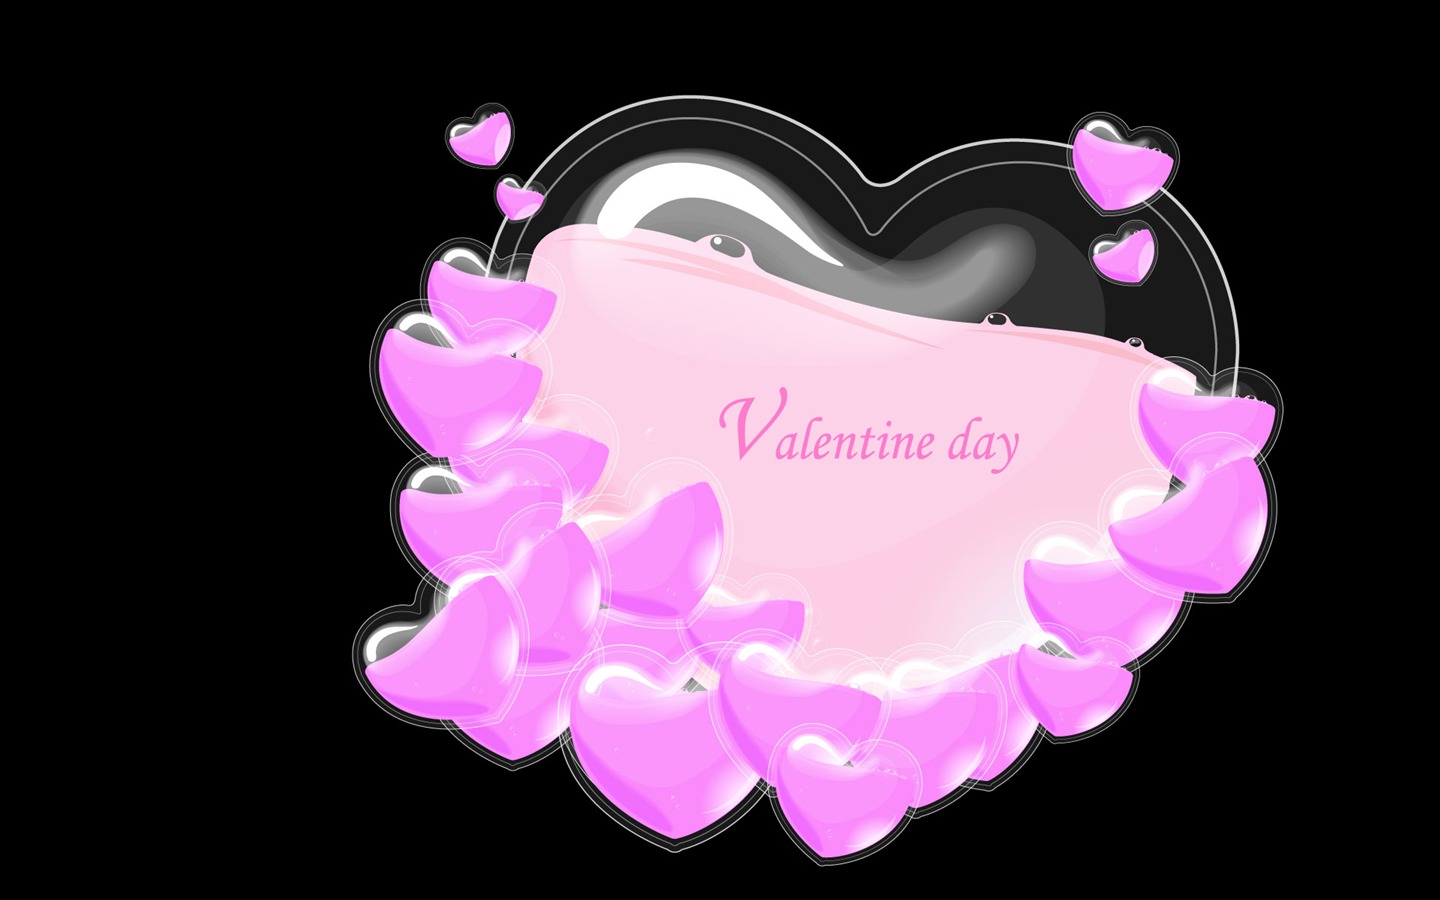 Valentine's Day Theme Wallpapers (2) #8 - 1440x900